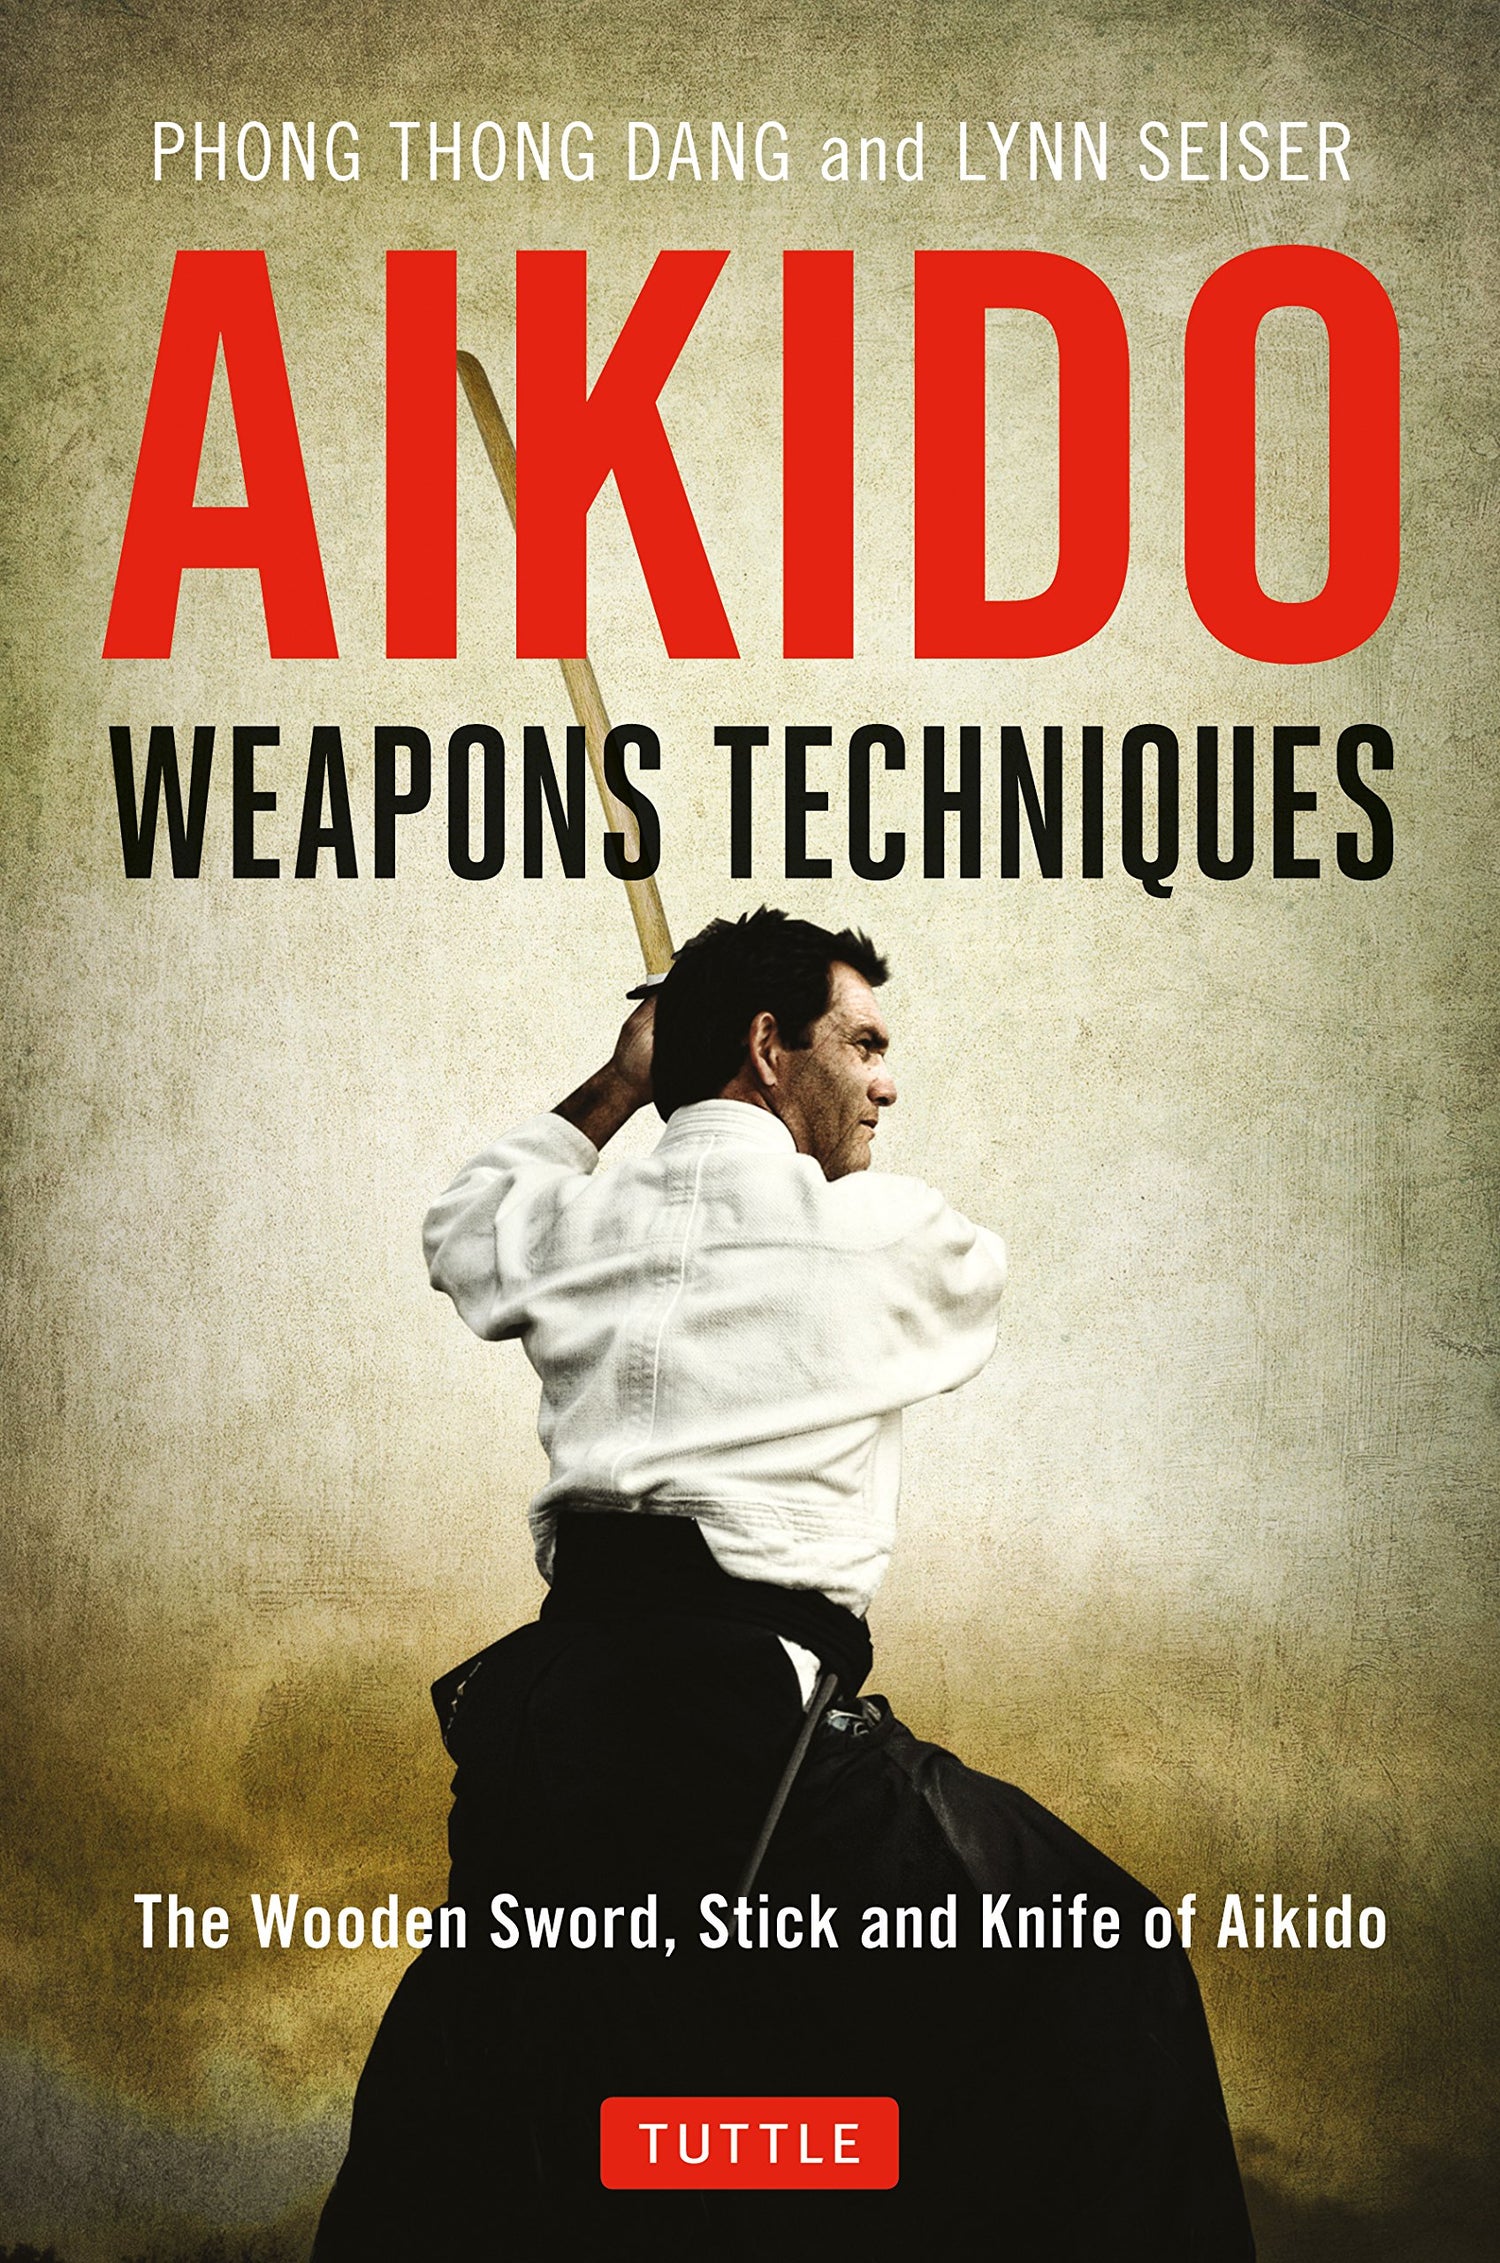 Aikido Weapons Techniques: The Wooden Sword, Stick and Knife of Aikido Book by Phong Thong Dang (Preowned) - Budovideos